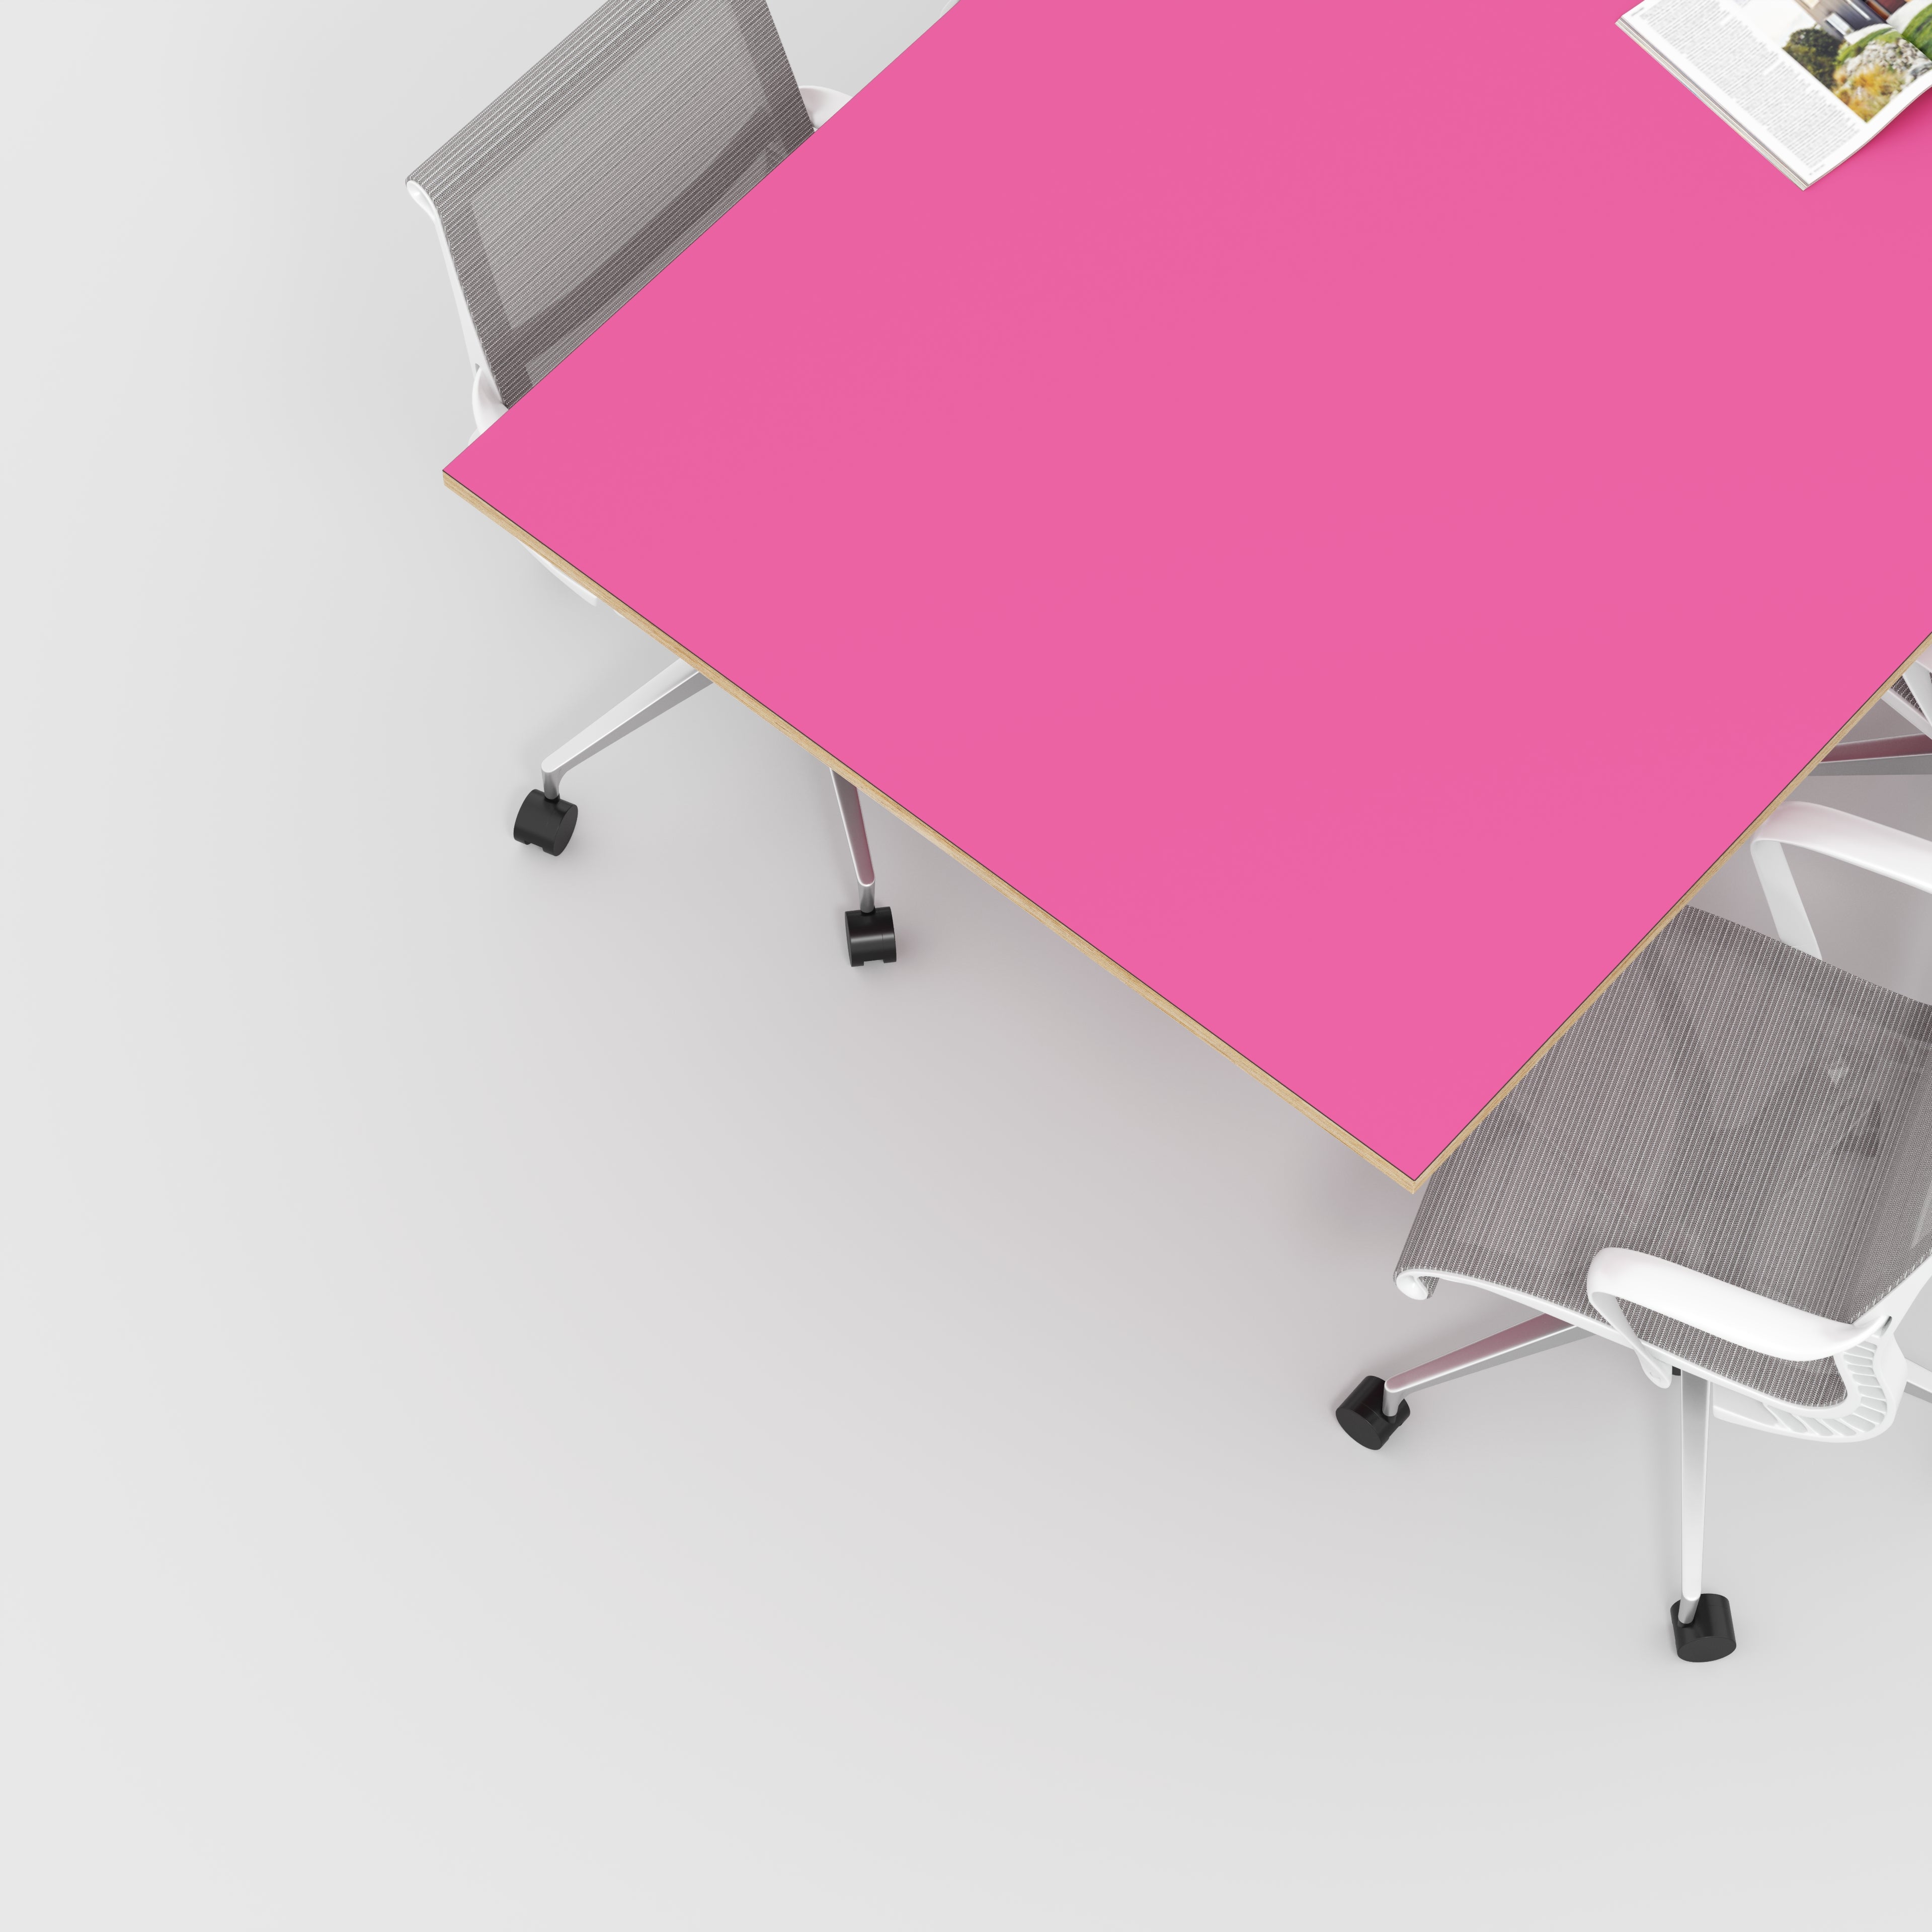 Plywood Tabletop - Formica Juicy Pink - 2400(w) x 1200(d)